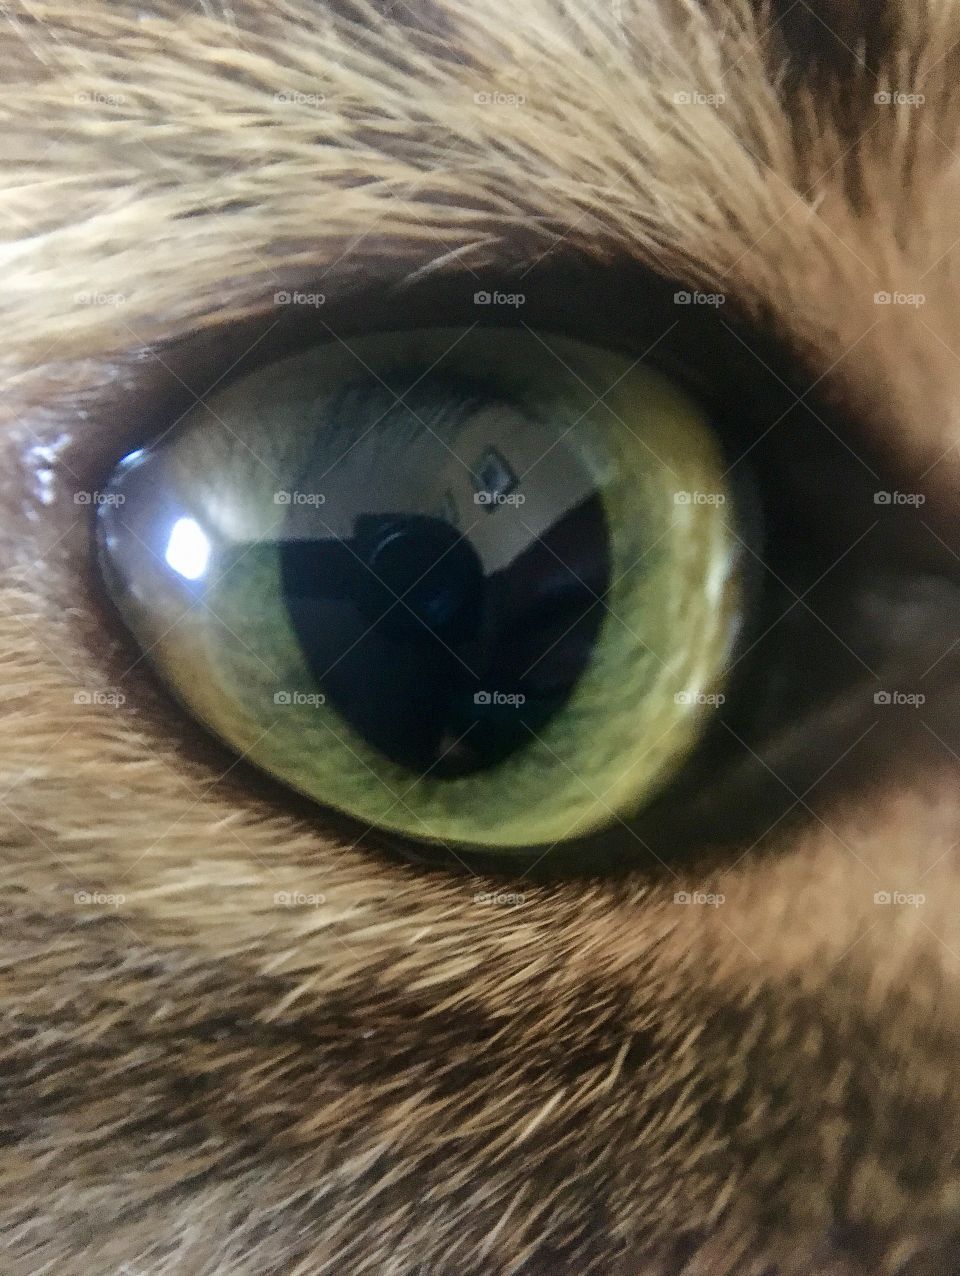 Take a picture of my eye